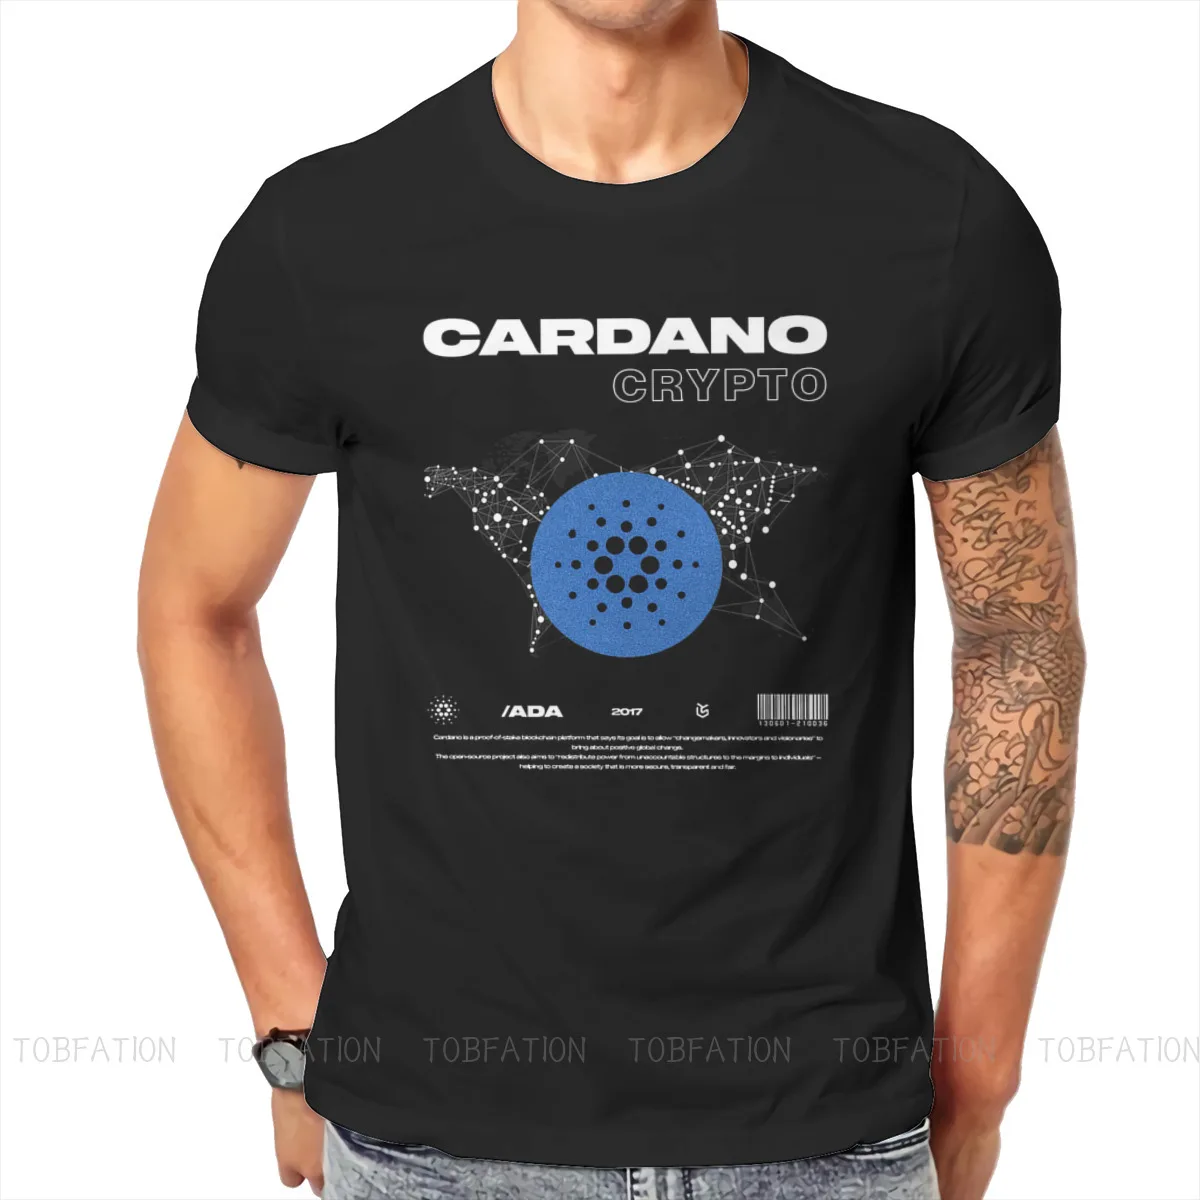 ADA Style TShirt Cardano Cryptocurrency Crypto Coin Top Quality New Design Gift Clothes  T Shirt Short Sleeve Hot Sale